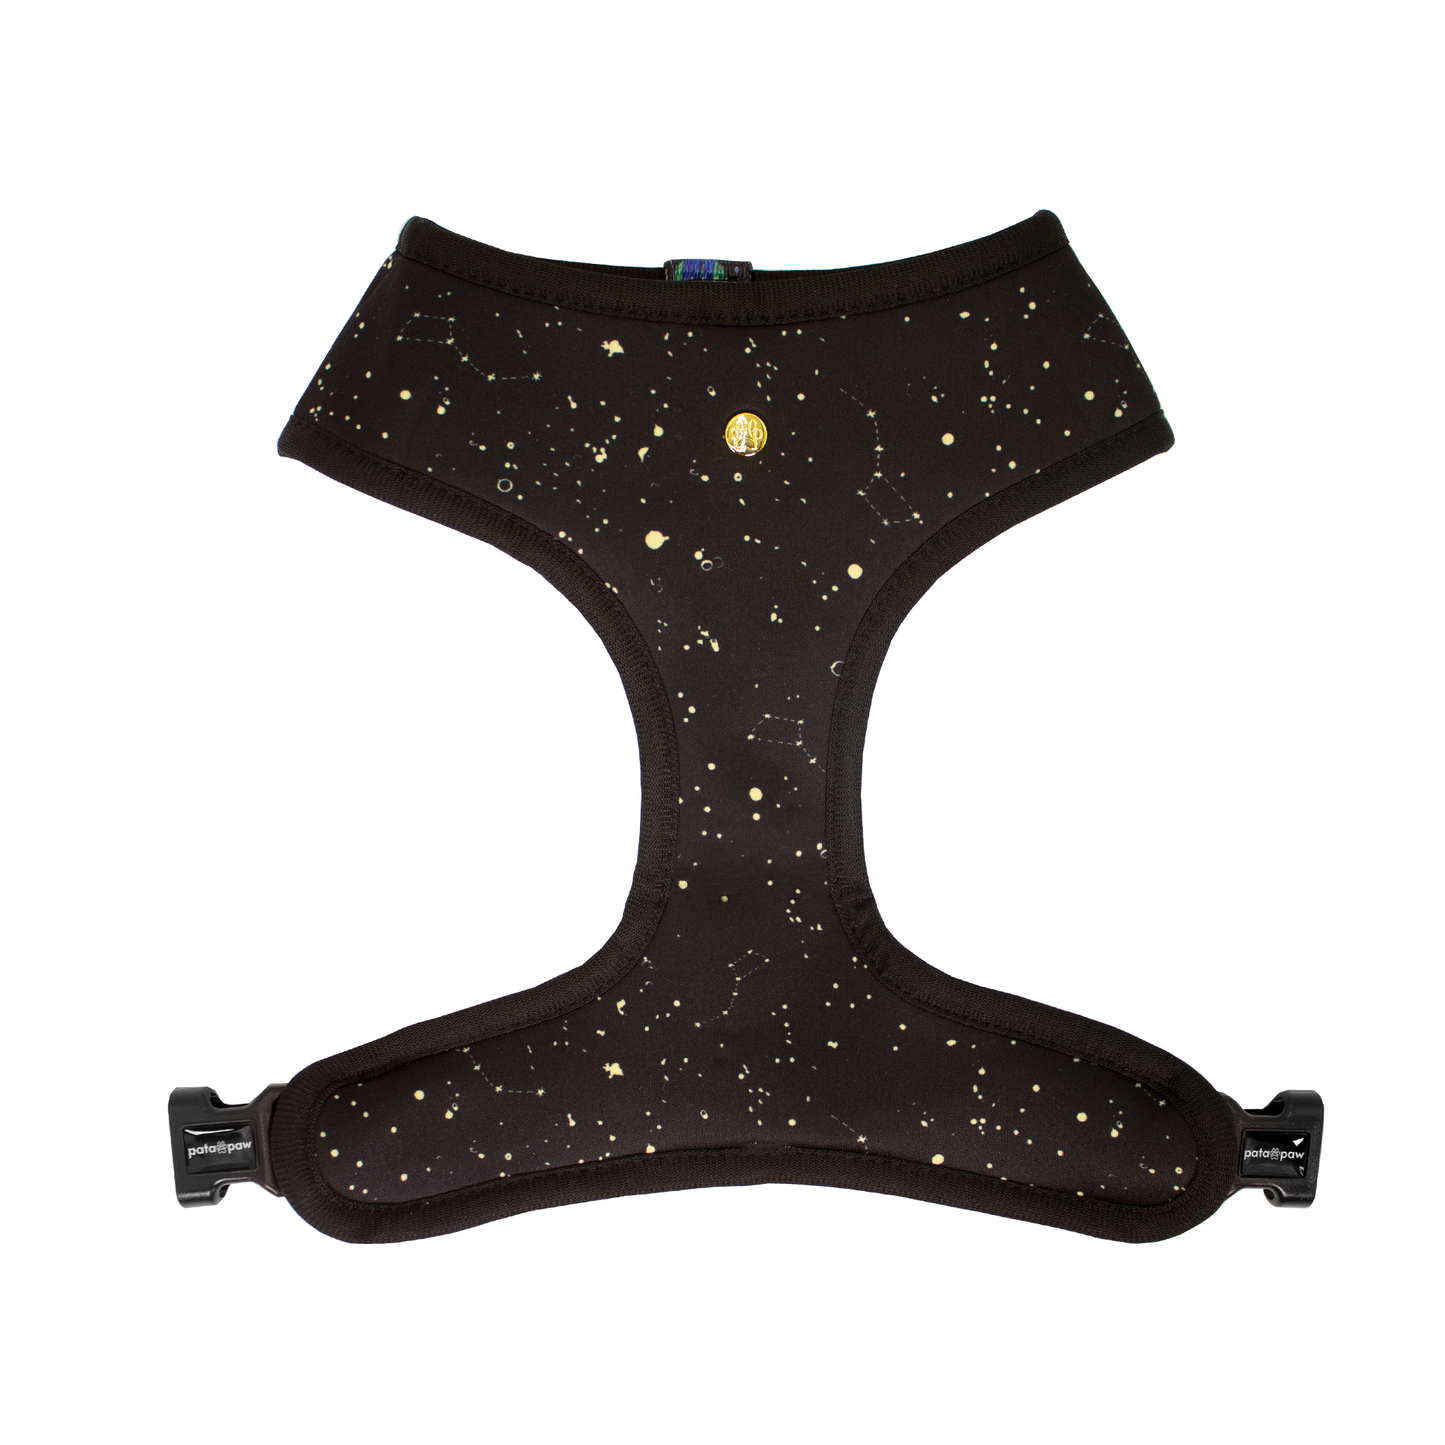 Pata Paw space explorer reversible harness showing galaxy pattern.